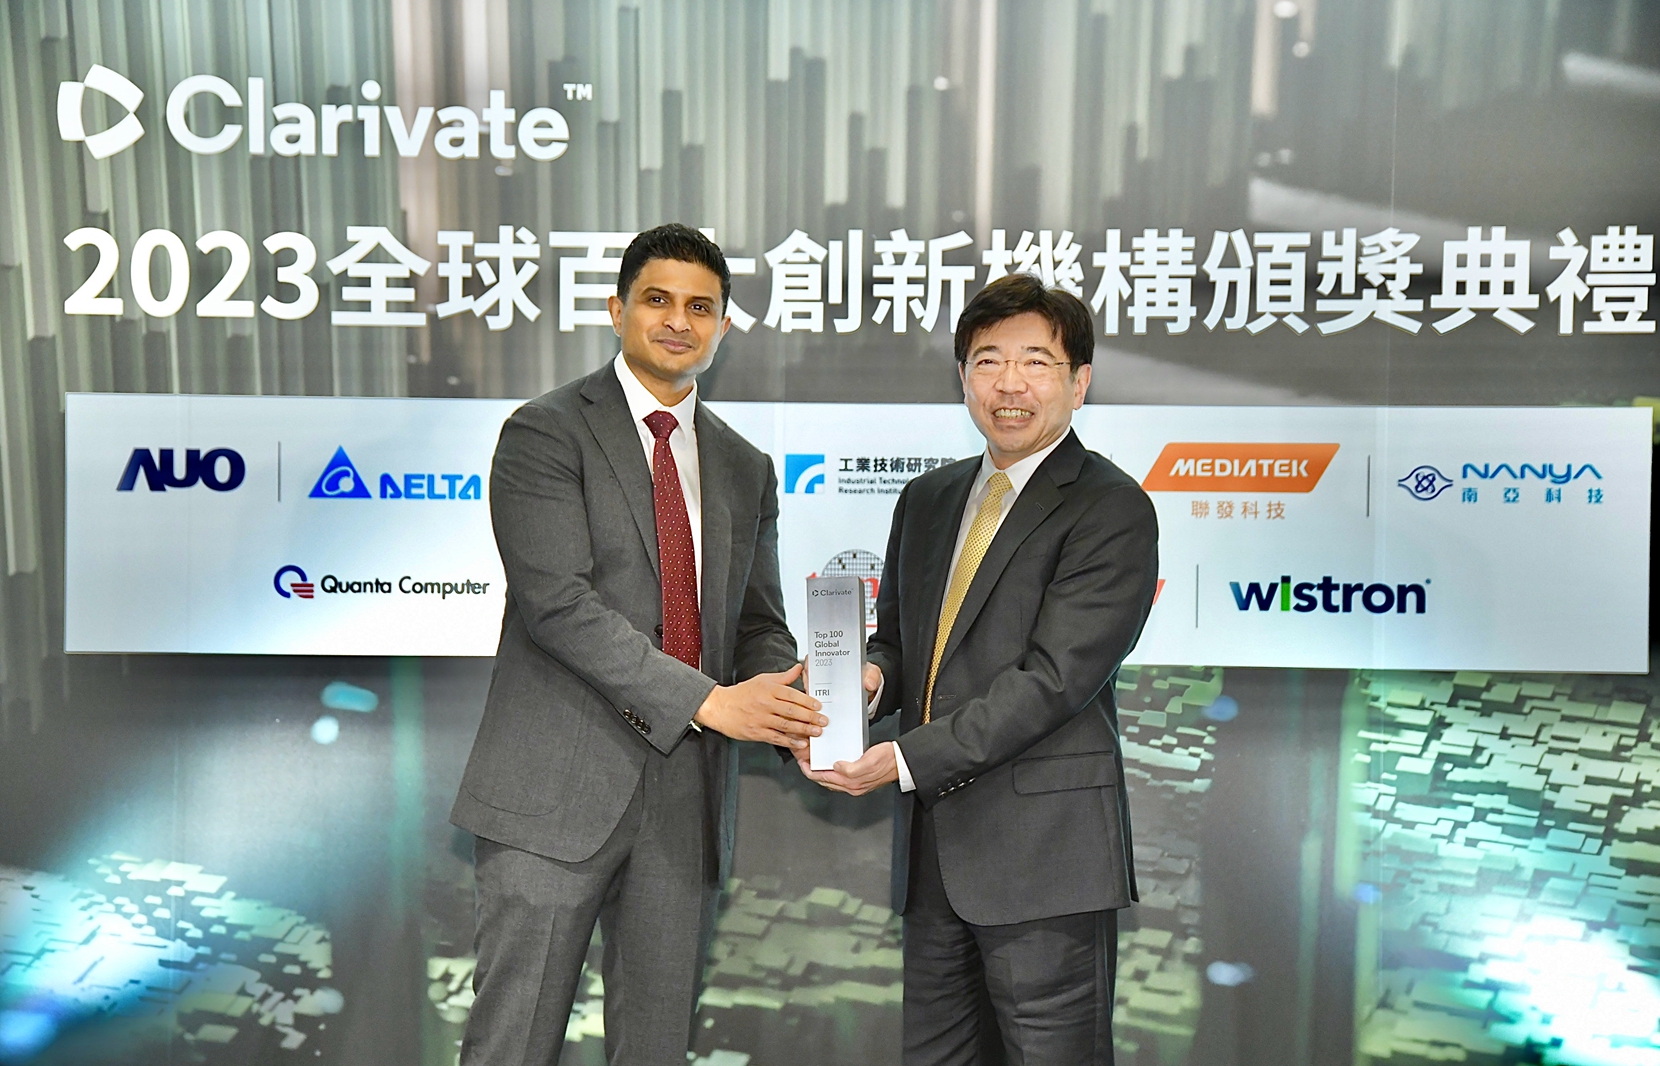 Vasheharan Kanesarajah, Clarivate’s Head of Strategy, Intellectual Property (left) awarded the Top Global Innovators trophy to ITRI President Dr. Edwin Liu (right).